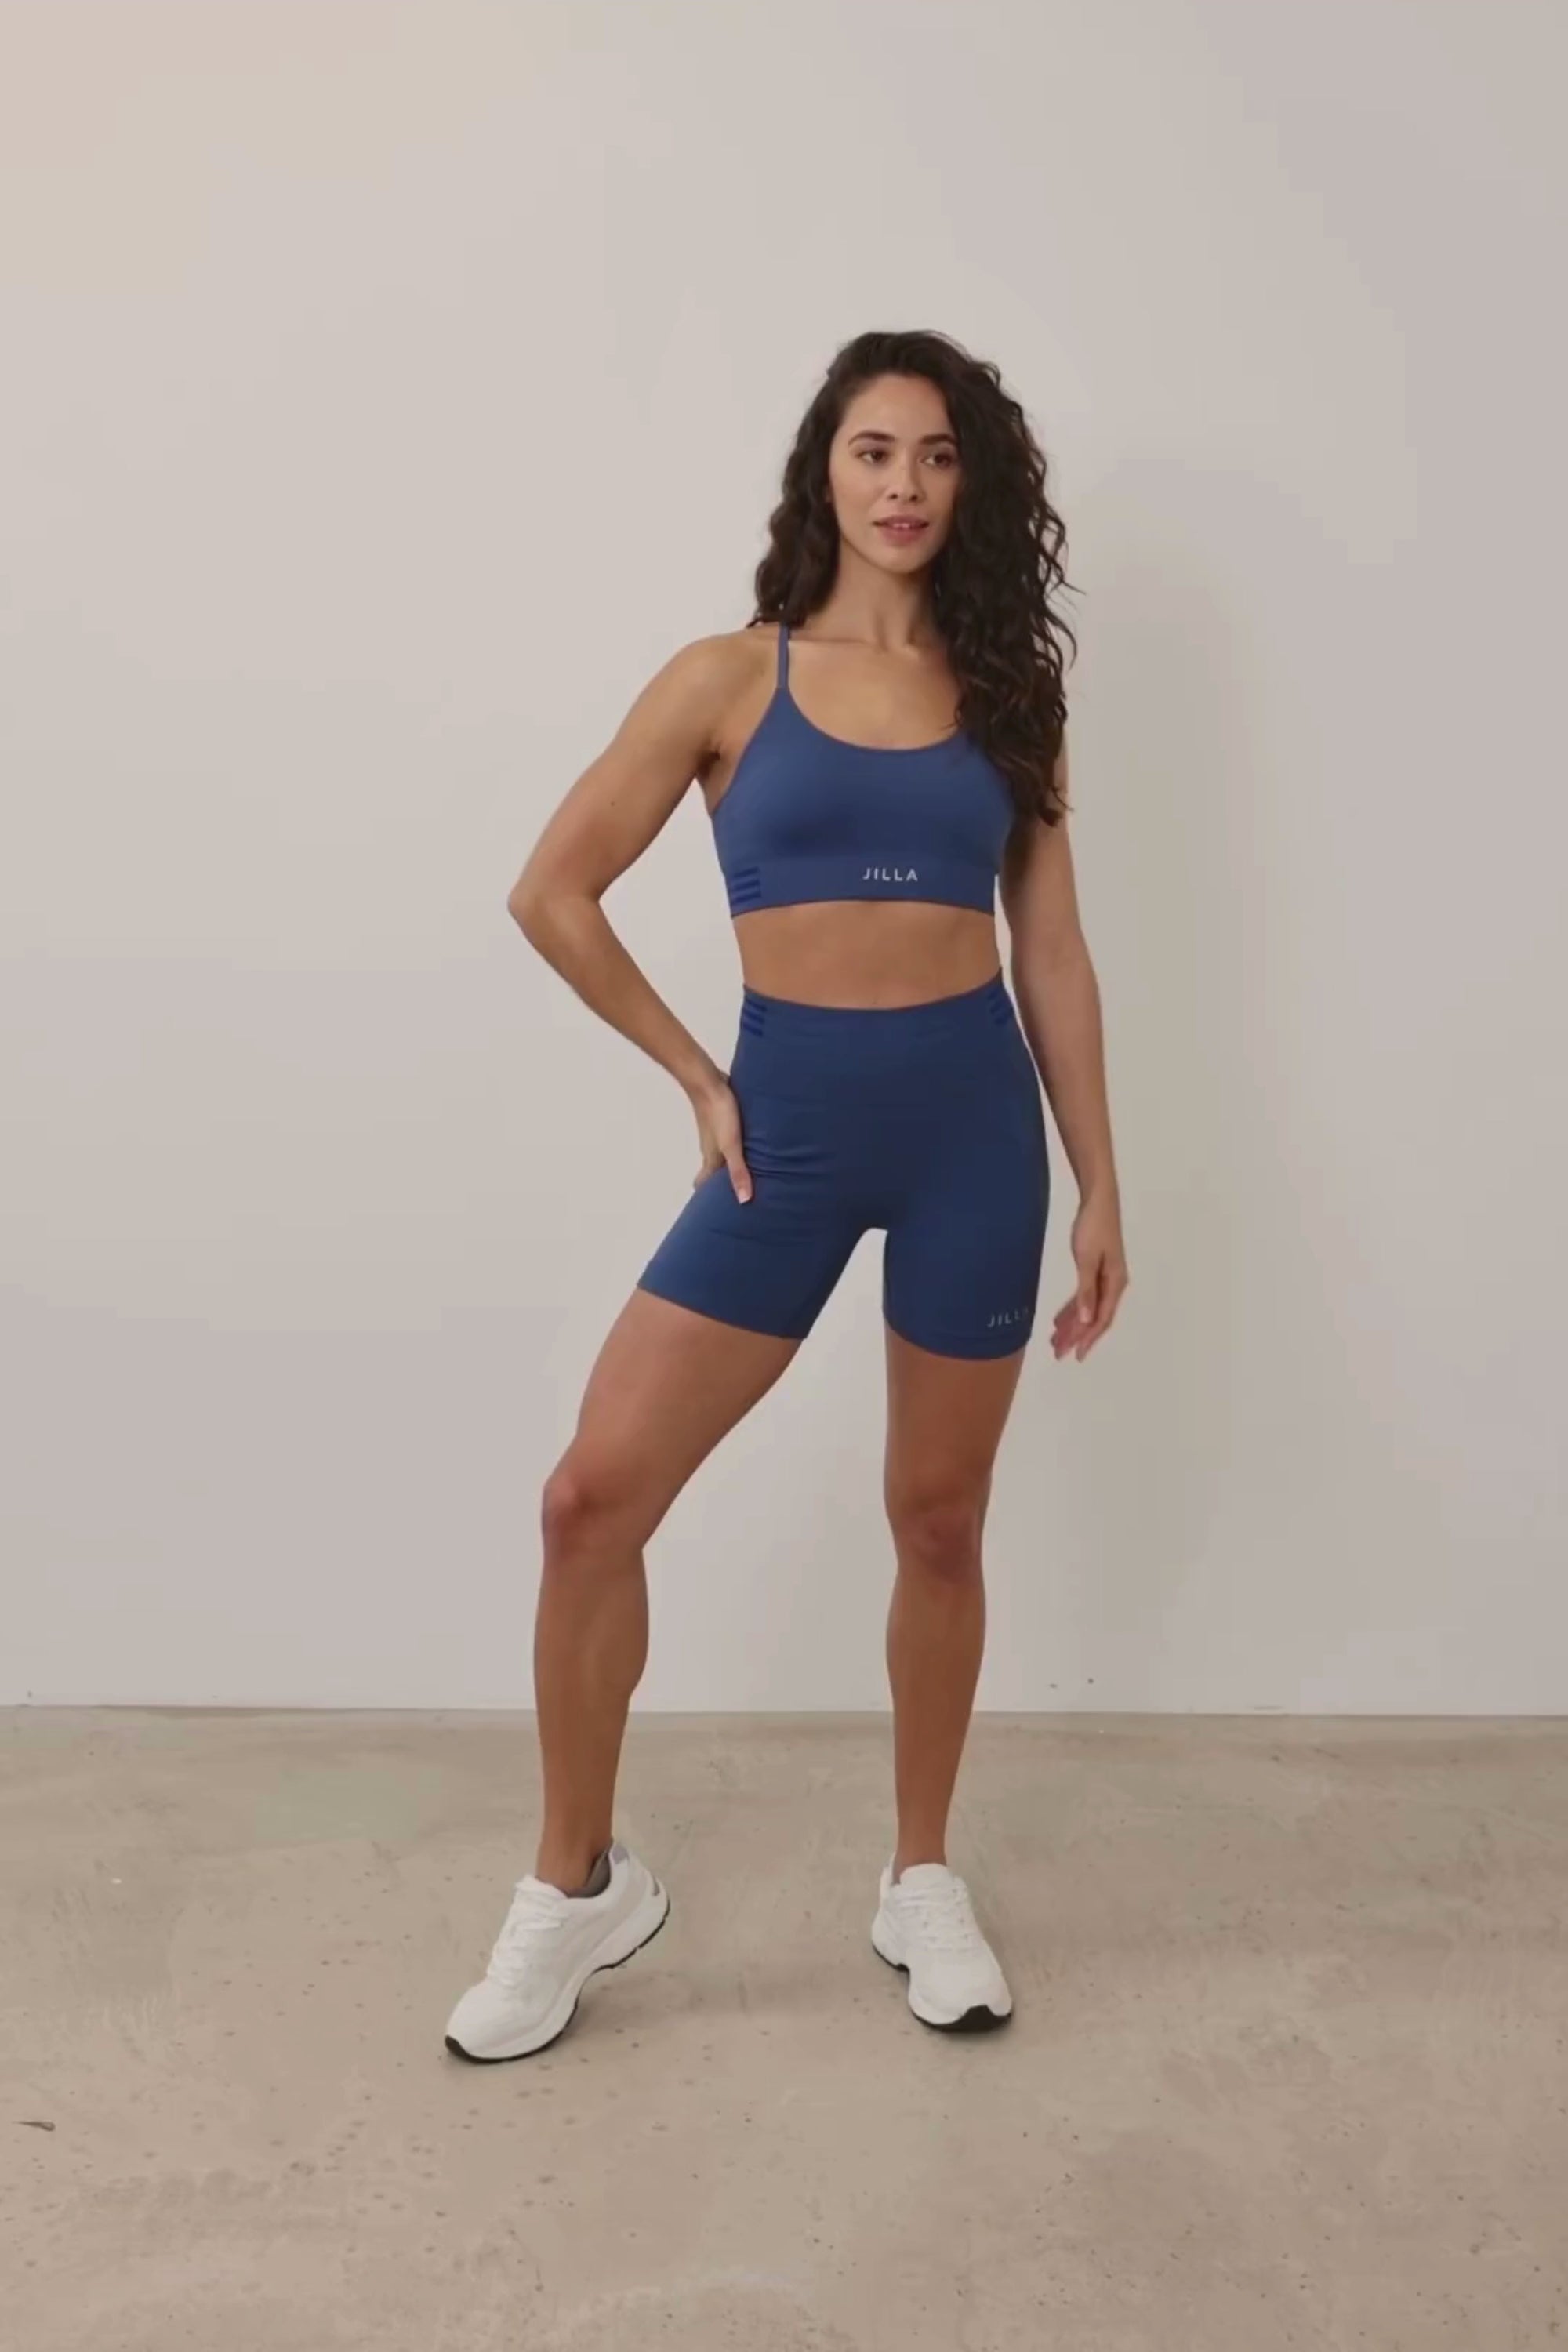 Meet our new denim blue Tone & Lift Recycled Sports Bra! Crafted for comfort and functionality, it's perfect for your active lifestyle. Made with sweat-wicking fabric and adjustable straps, it offers support and adaptability. With stylish details and light to medium support, it's ideal for yoga, pilates, and beyond. Elevate your workout with sustainable style by Jilla Active